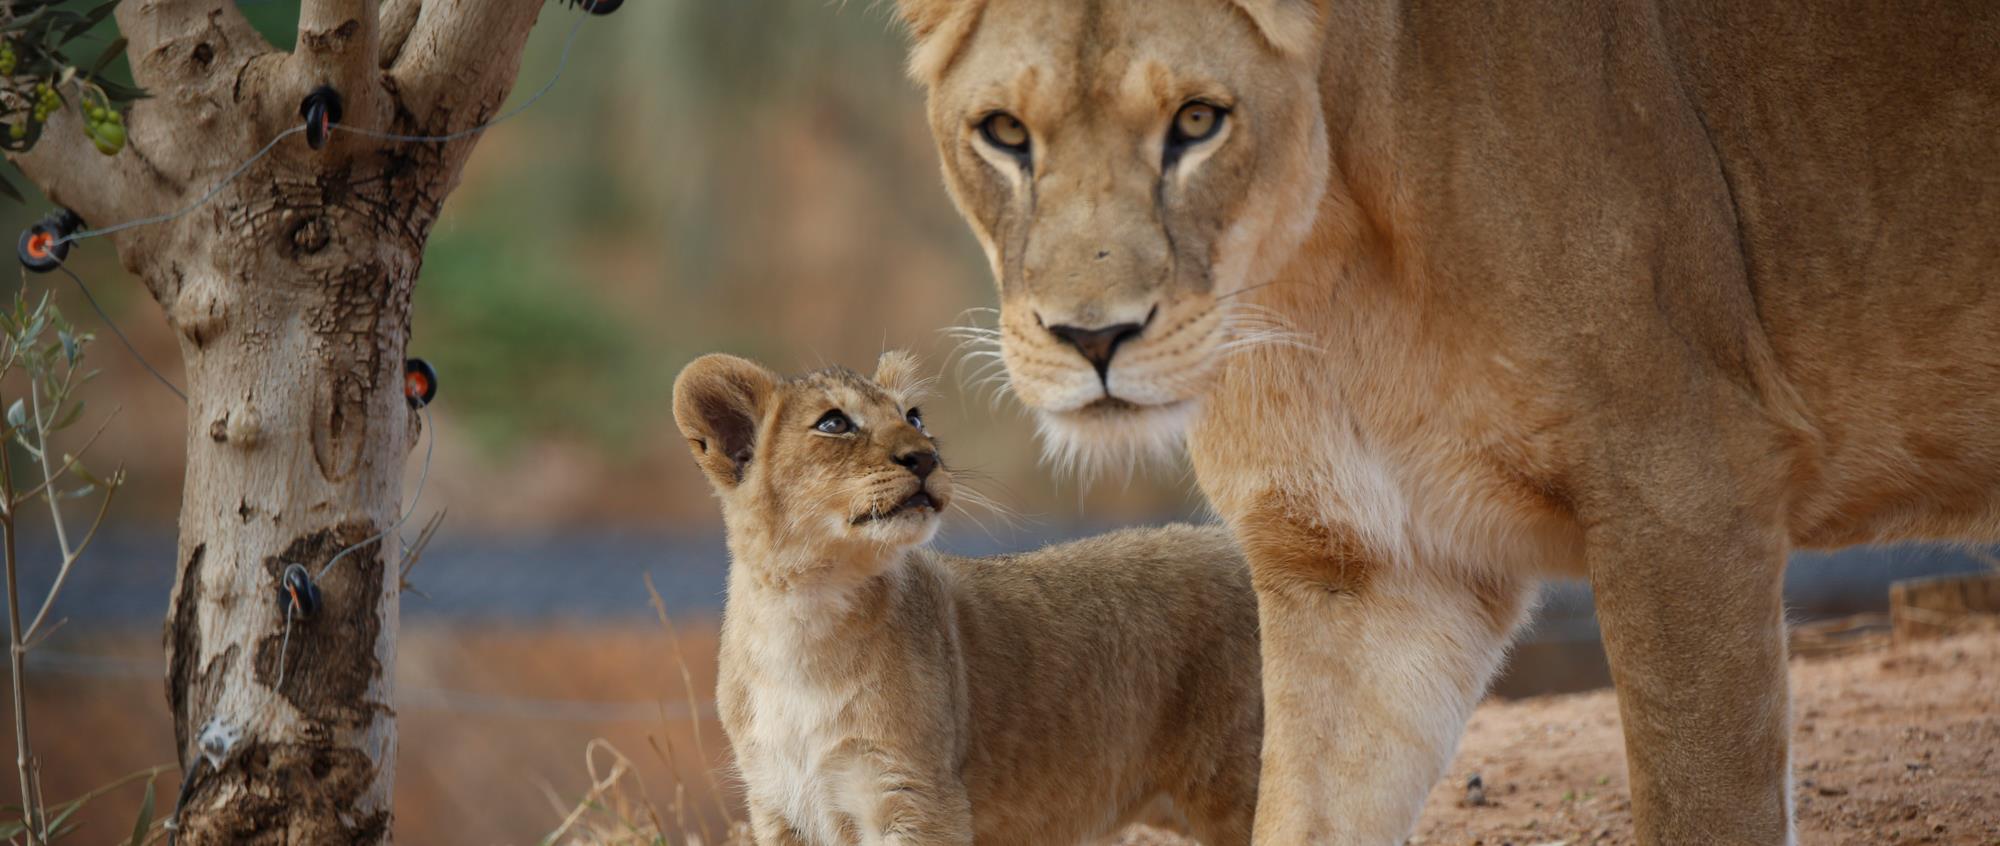 African Lion cub starting at its mother who is looking into the camera